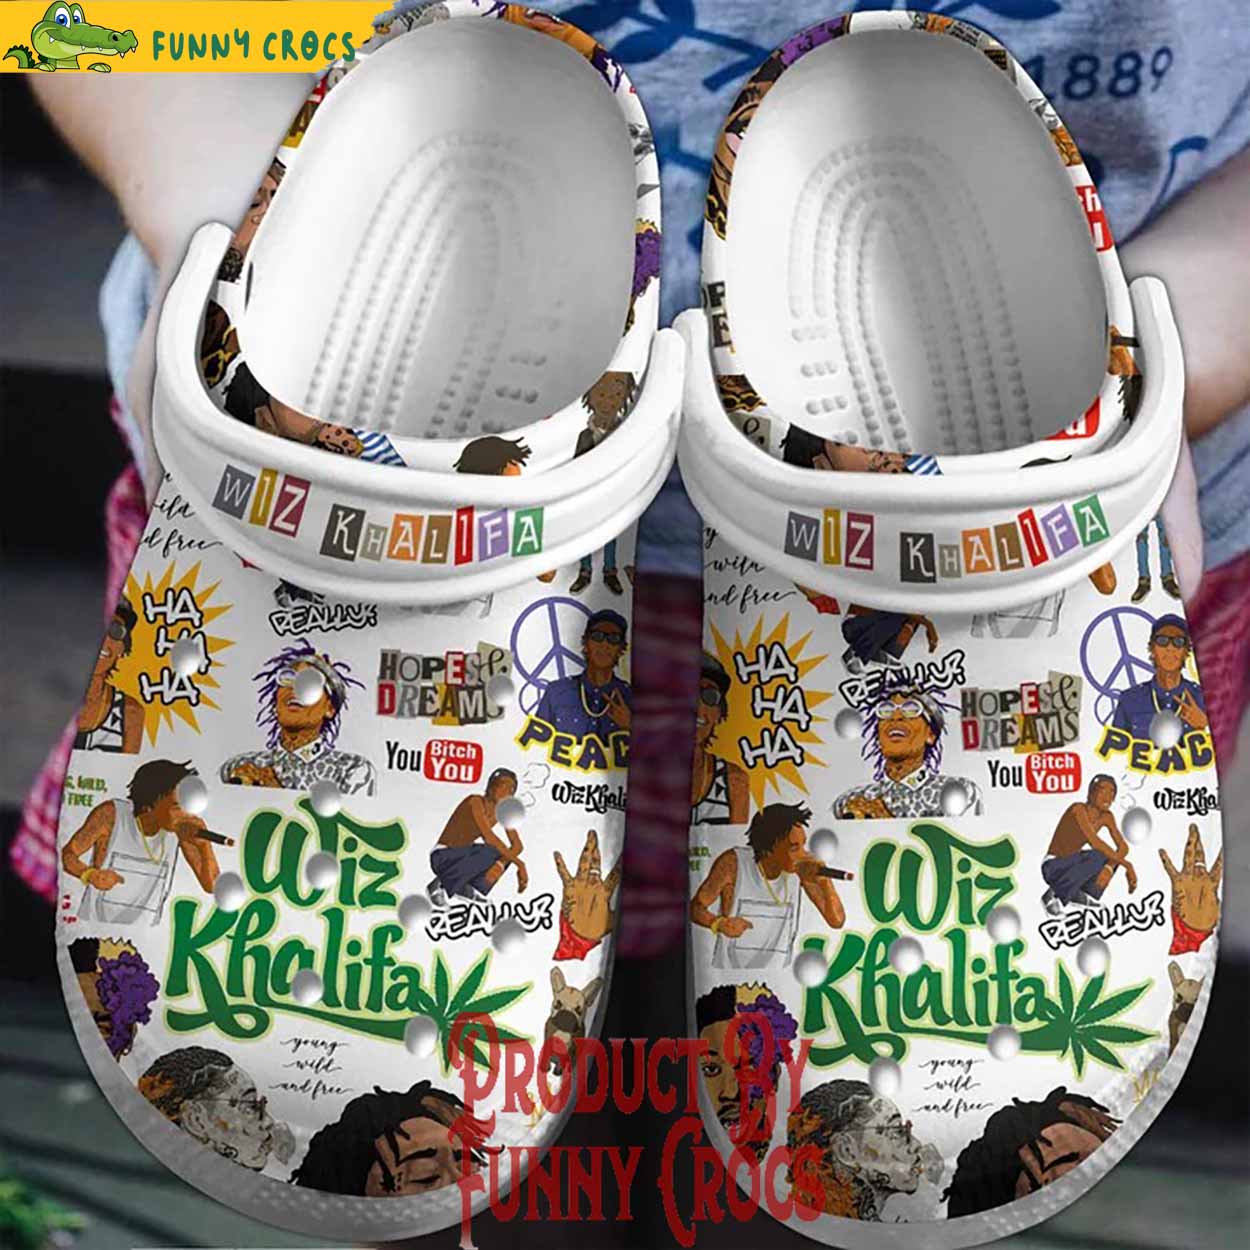 Wiz Khalifa Rapper Crocs Gifts - Discover Comfort And Style Clog Shoes ...